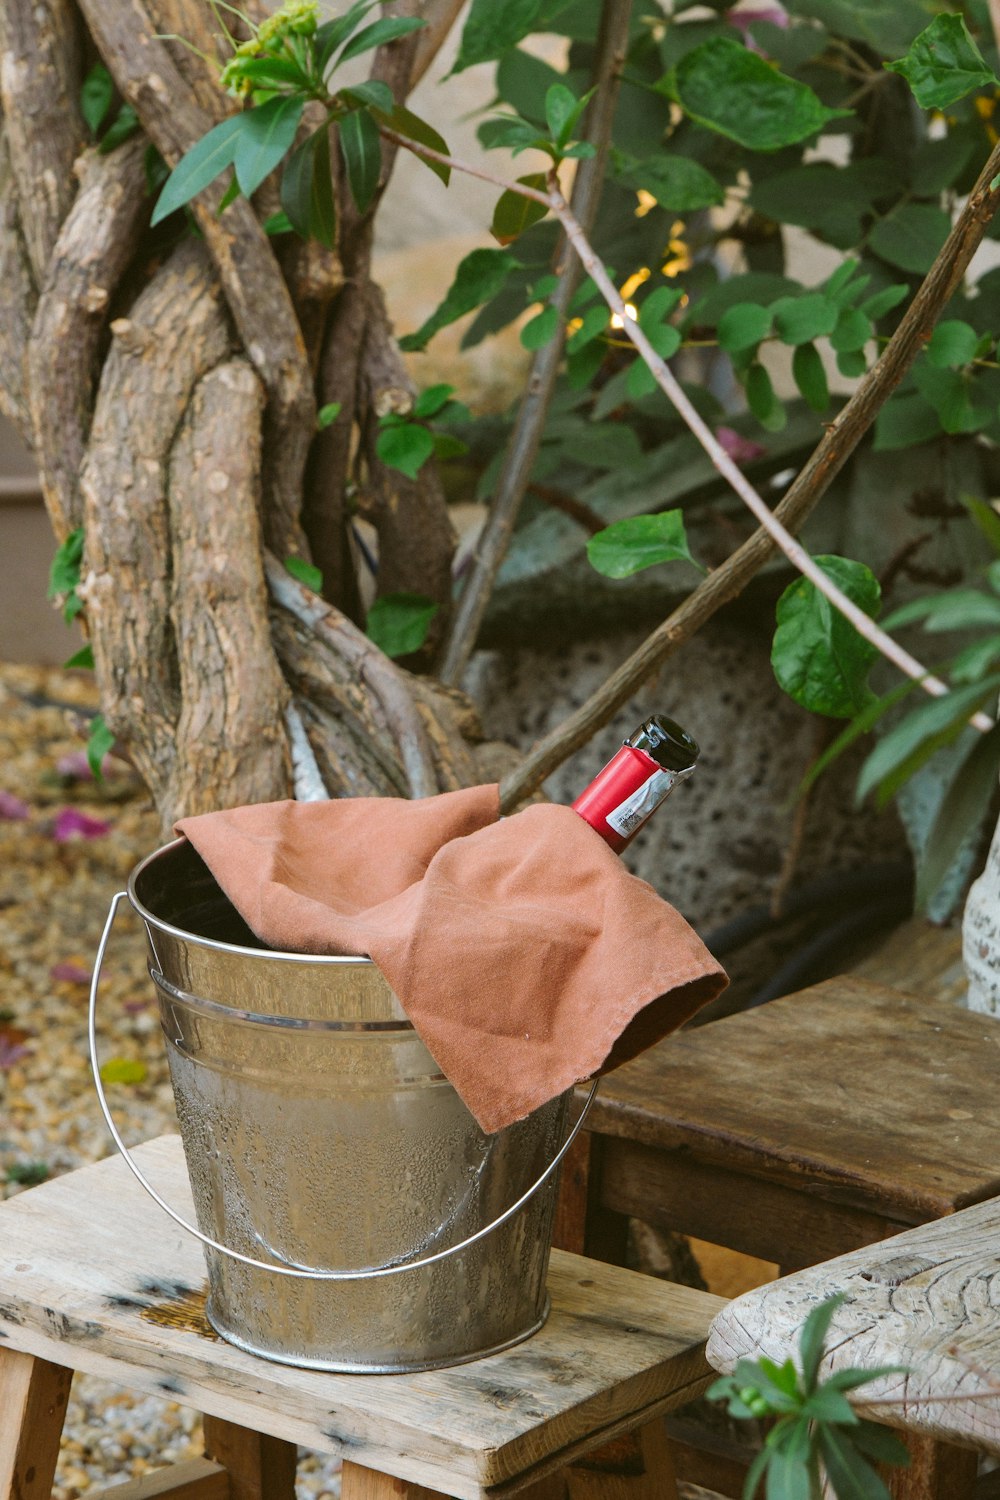 a metal bucket with a red handle on a wooden table